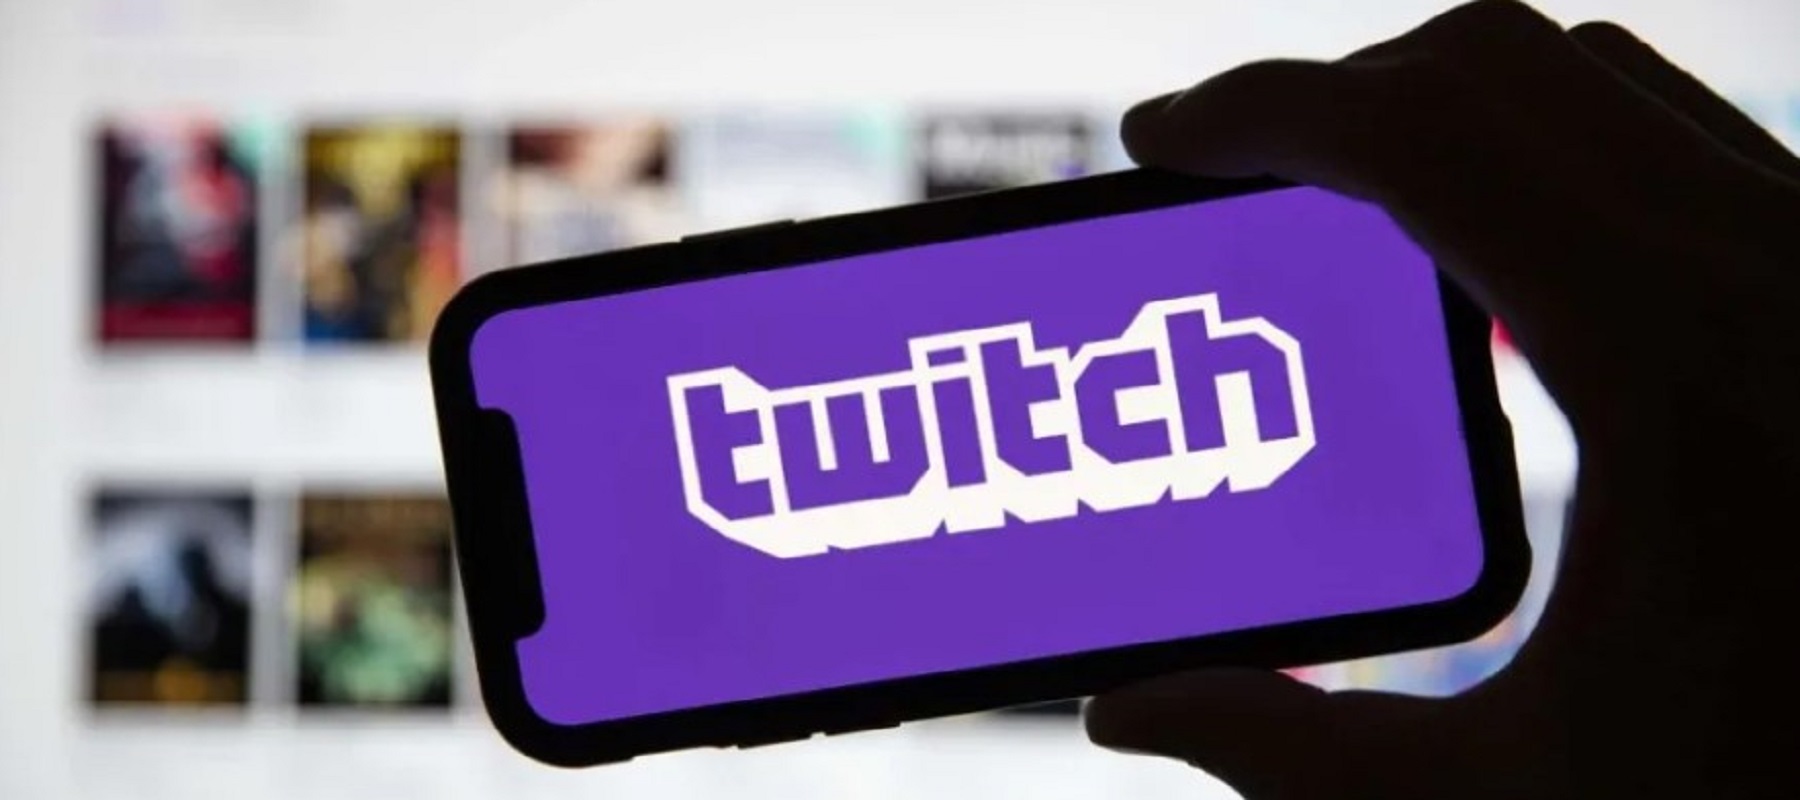 Social media app Twitch set to introduce short-form video features